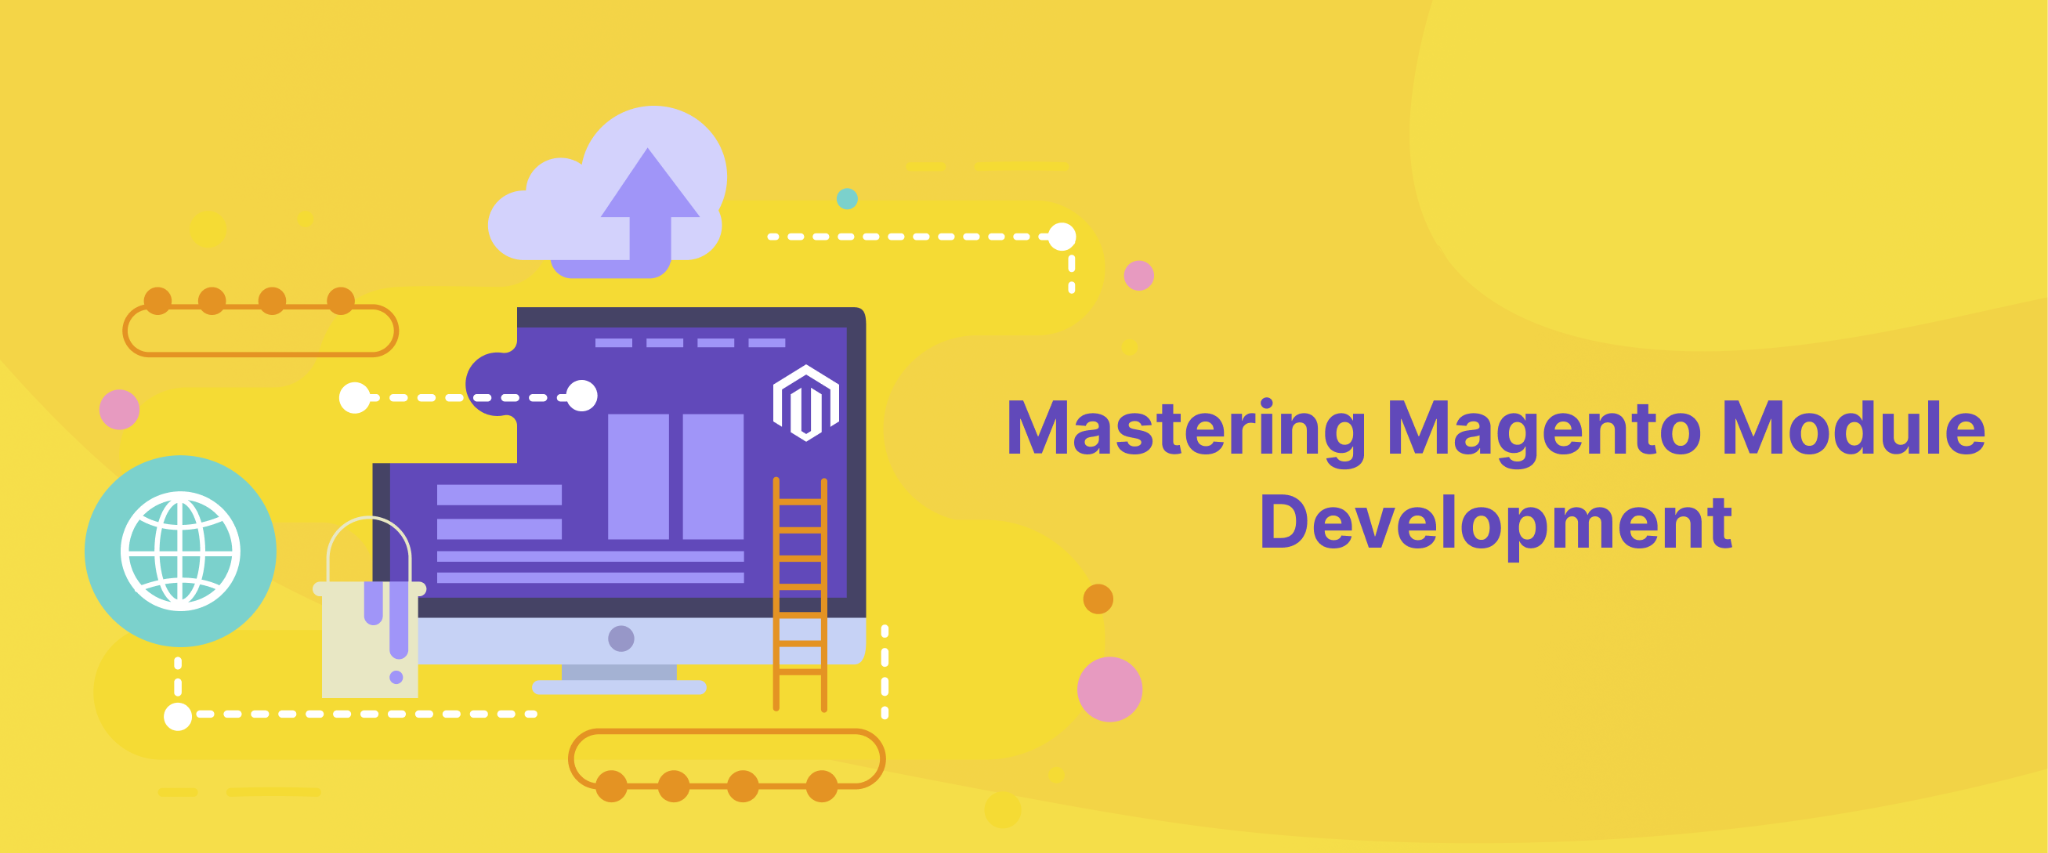 Mastering Magento Module Development: Essential Tips and Tricks